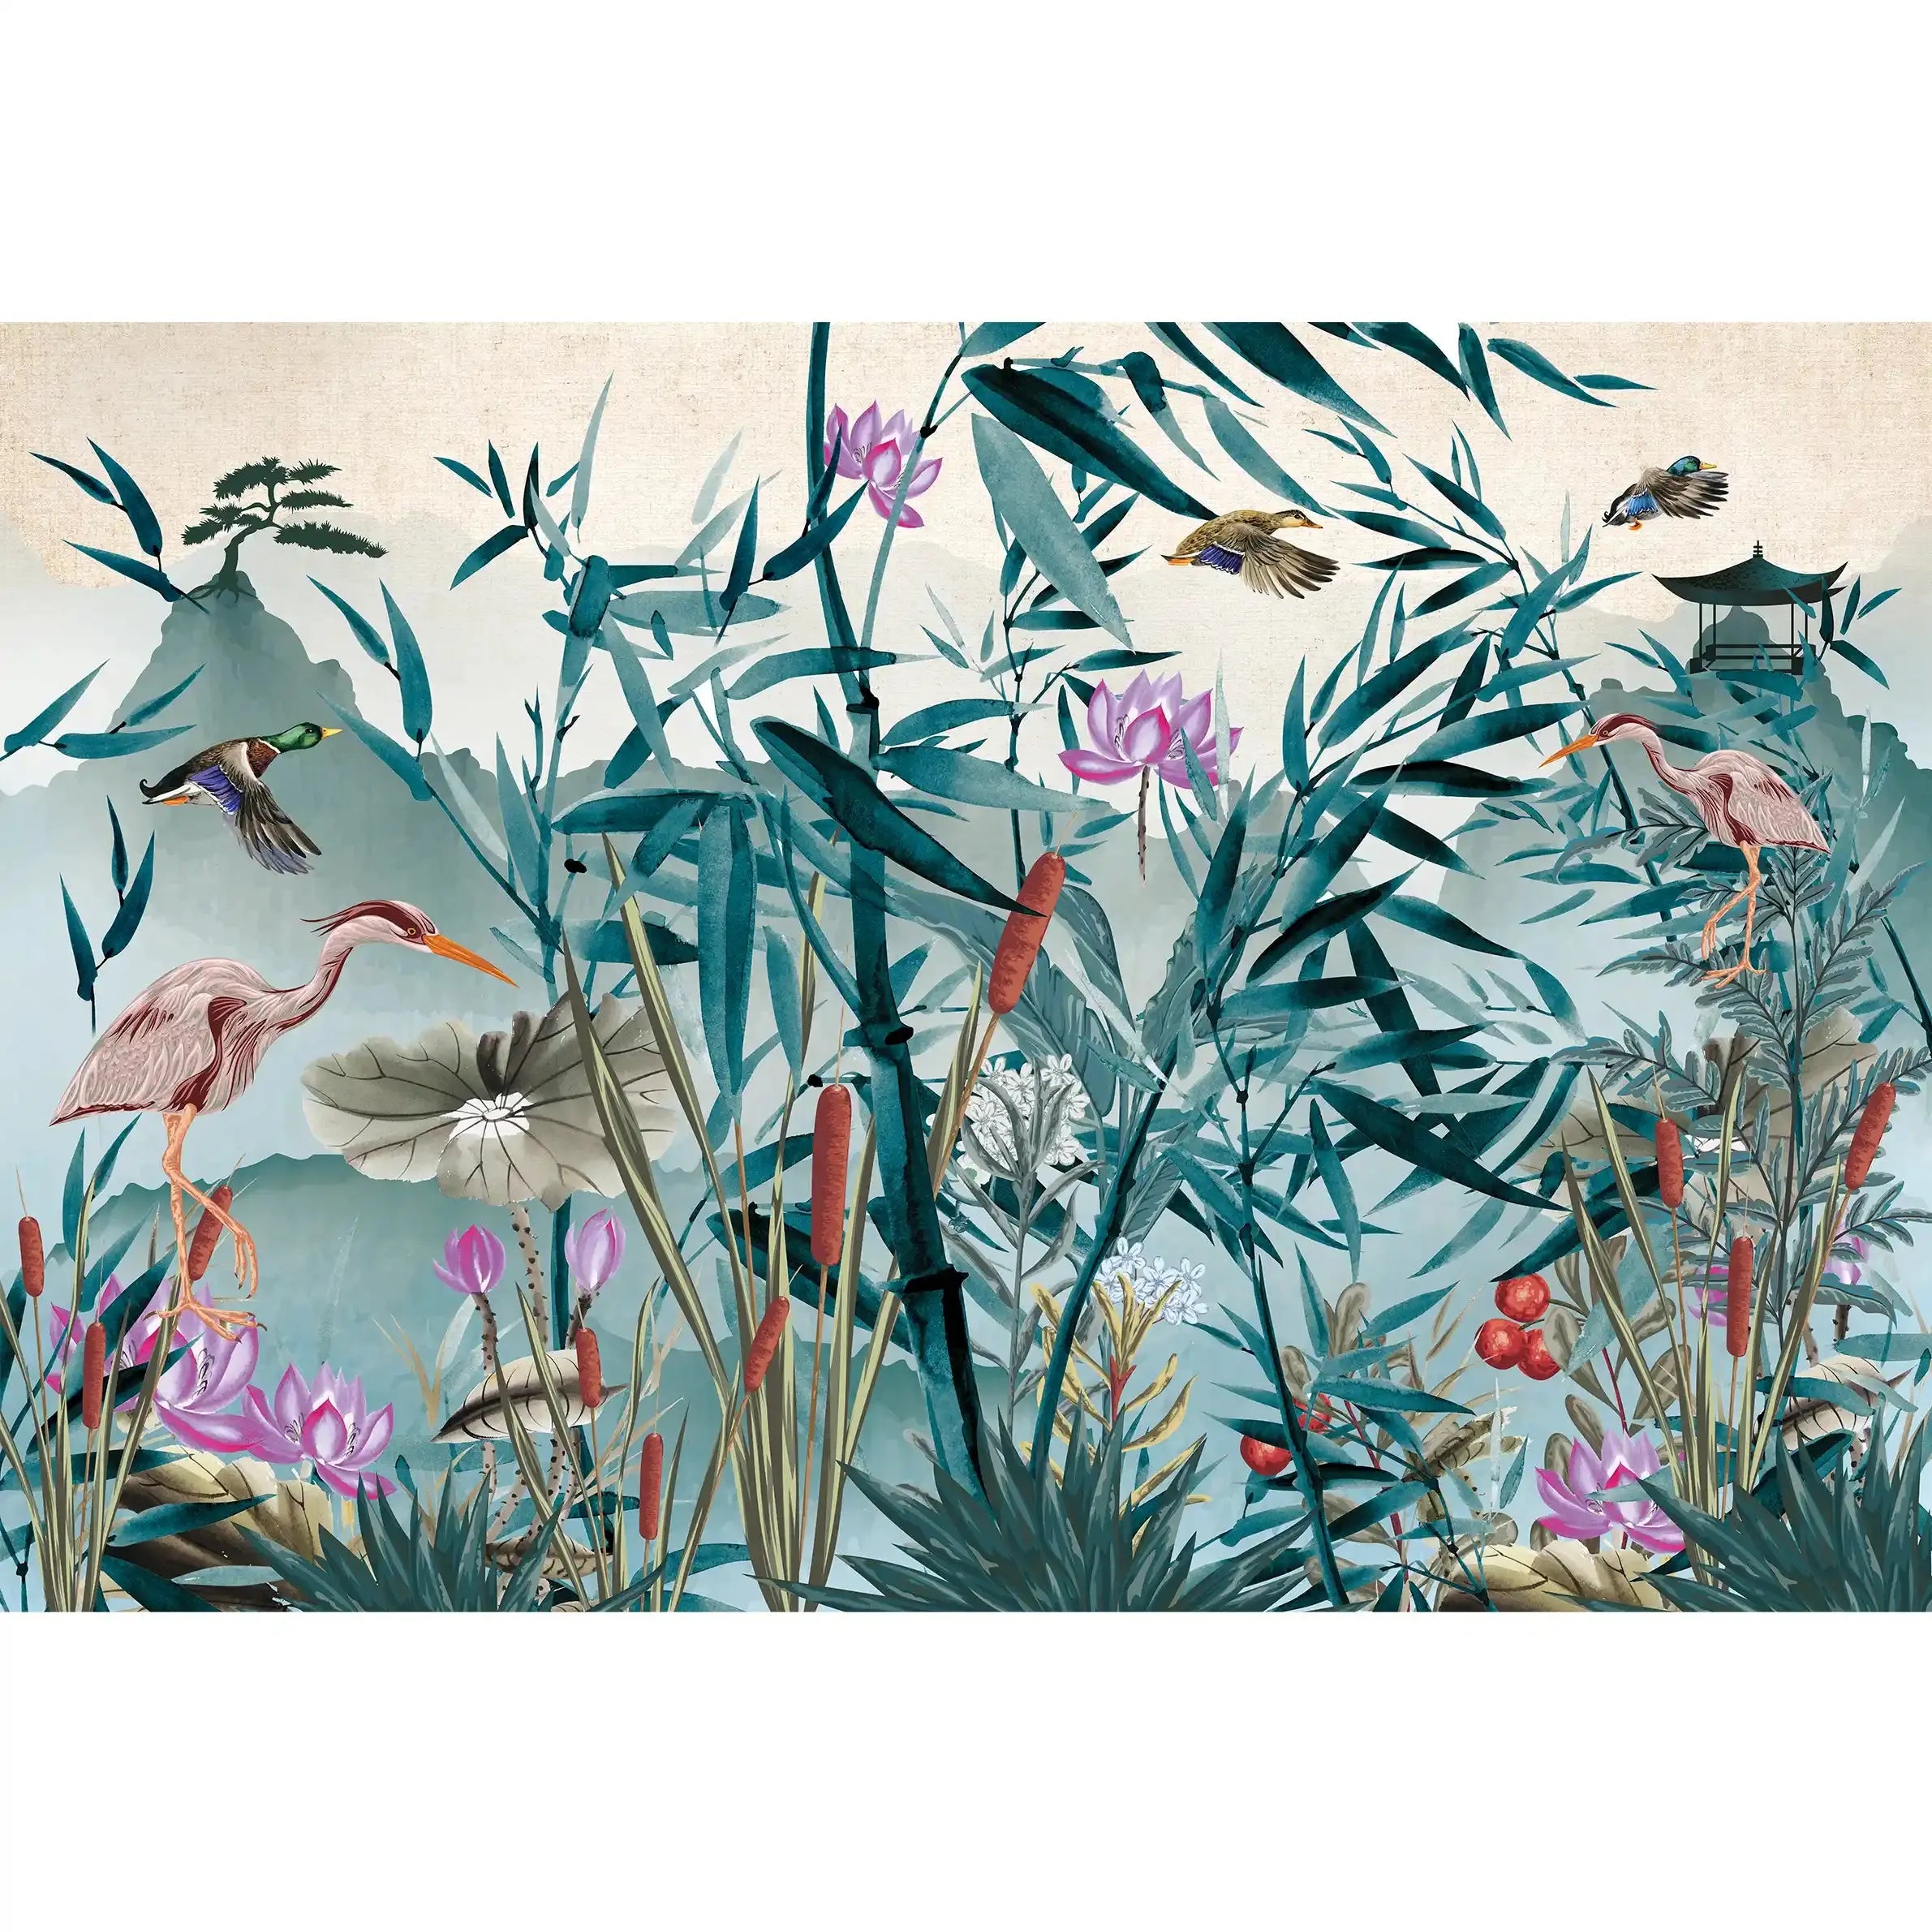 3057-B / Removable Wallpaper Peel and Stick - Watercolor Birds and Flowers, Oriental Painting Inspired, Easy Install, Wall Decor - Artevella